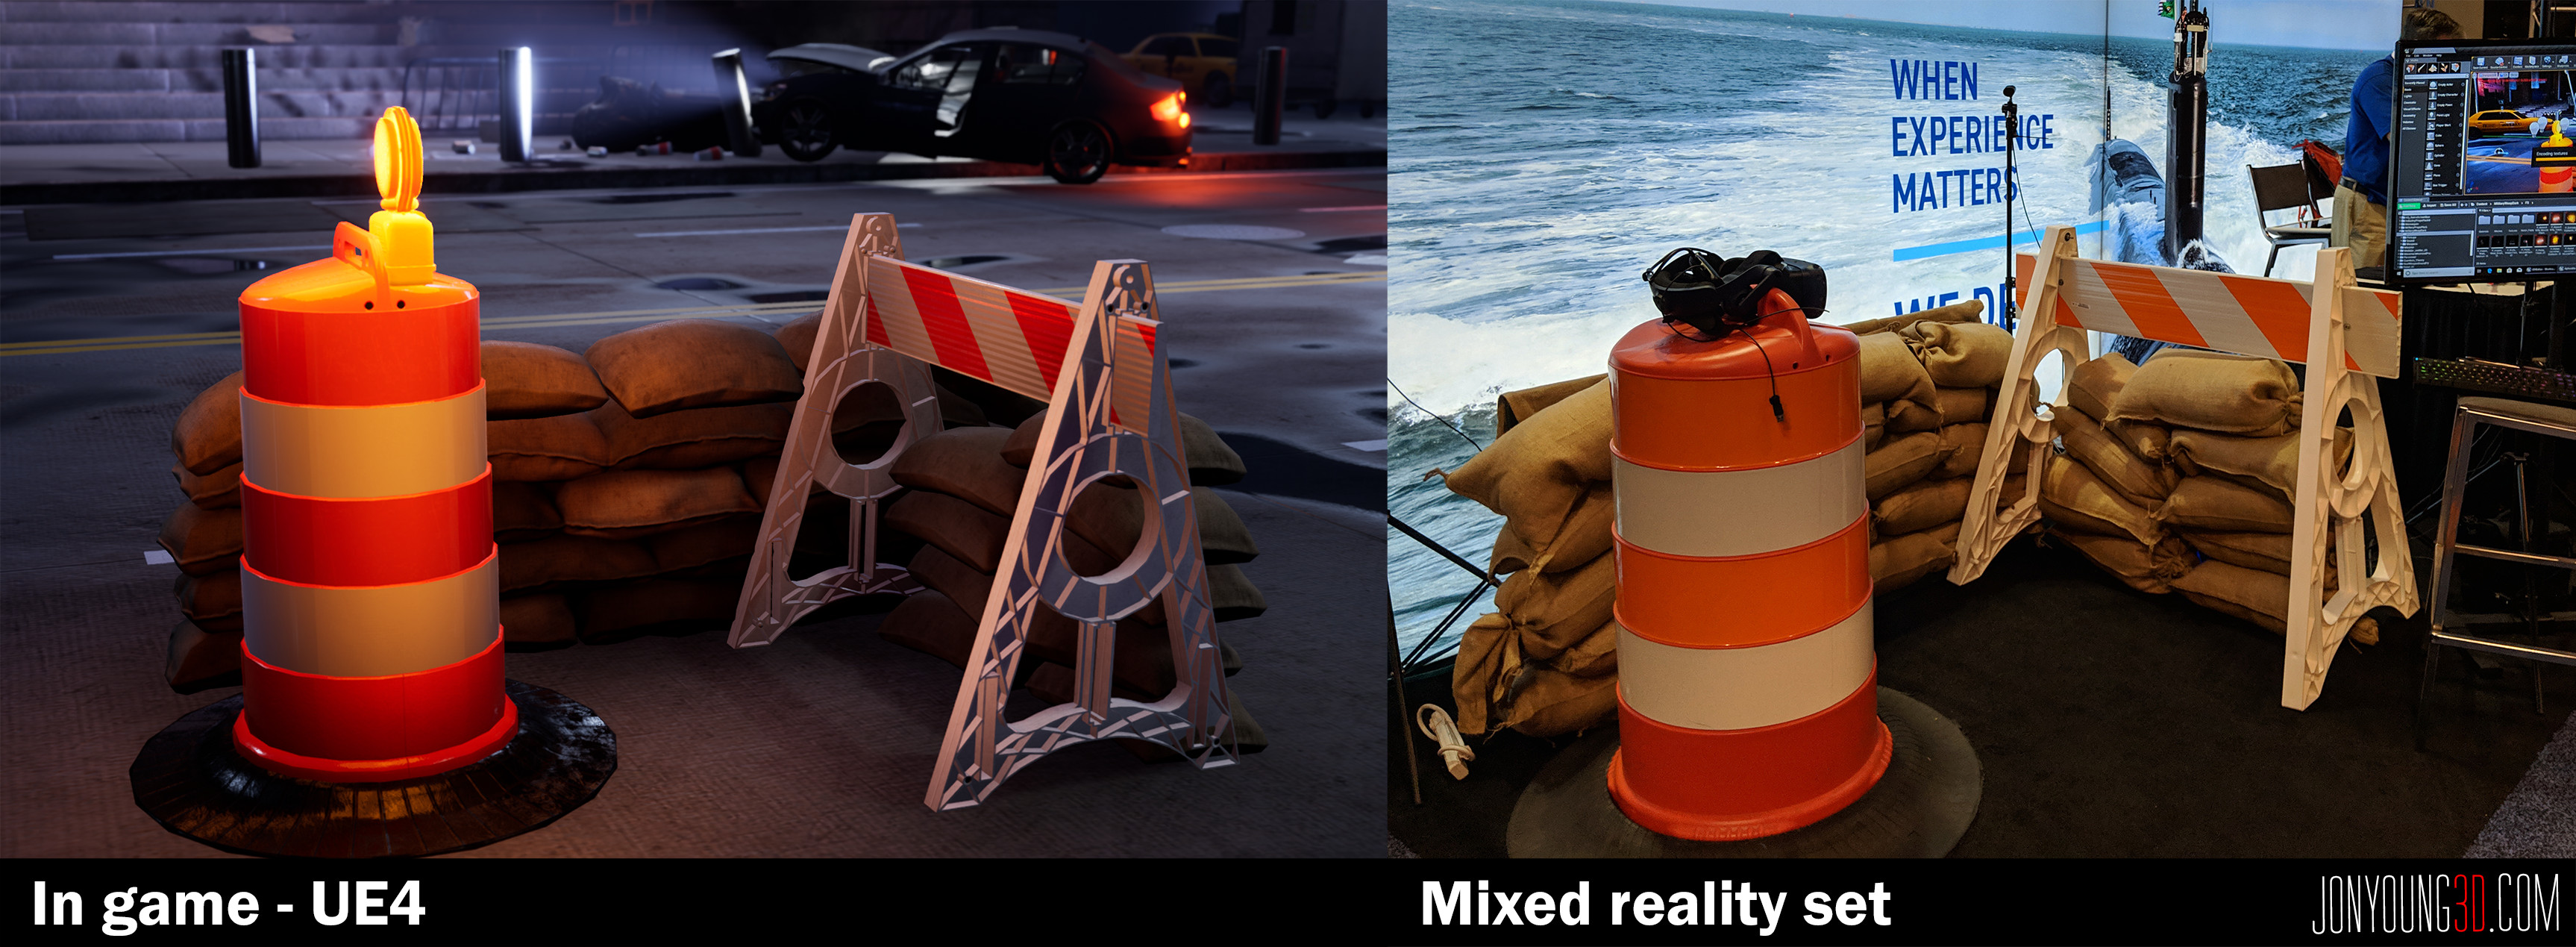 I modeled the traffic cone and barricade 3D models and textured them in Substance Painter to ensure the mixed reality set pieces matched 1:1 with their real-world counterparts.